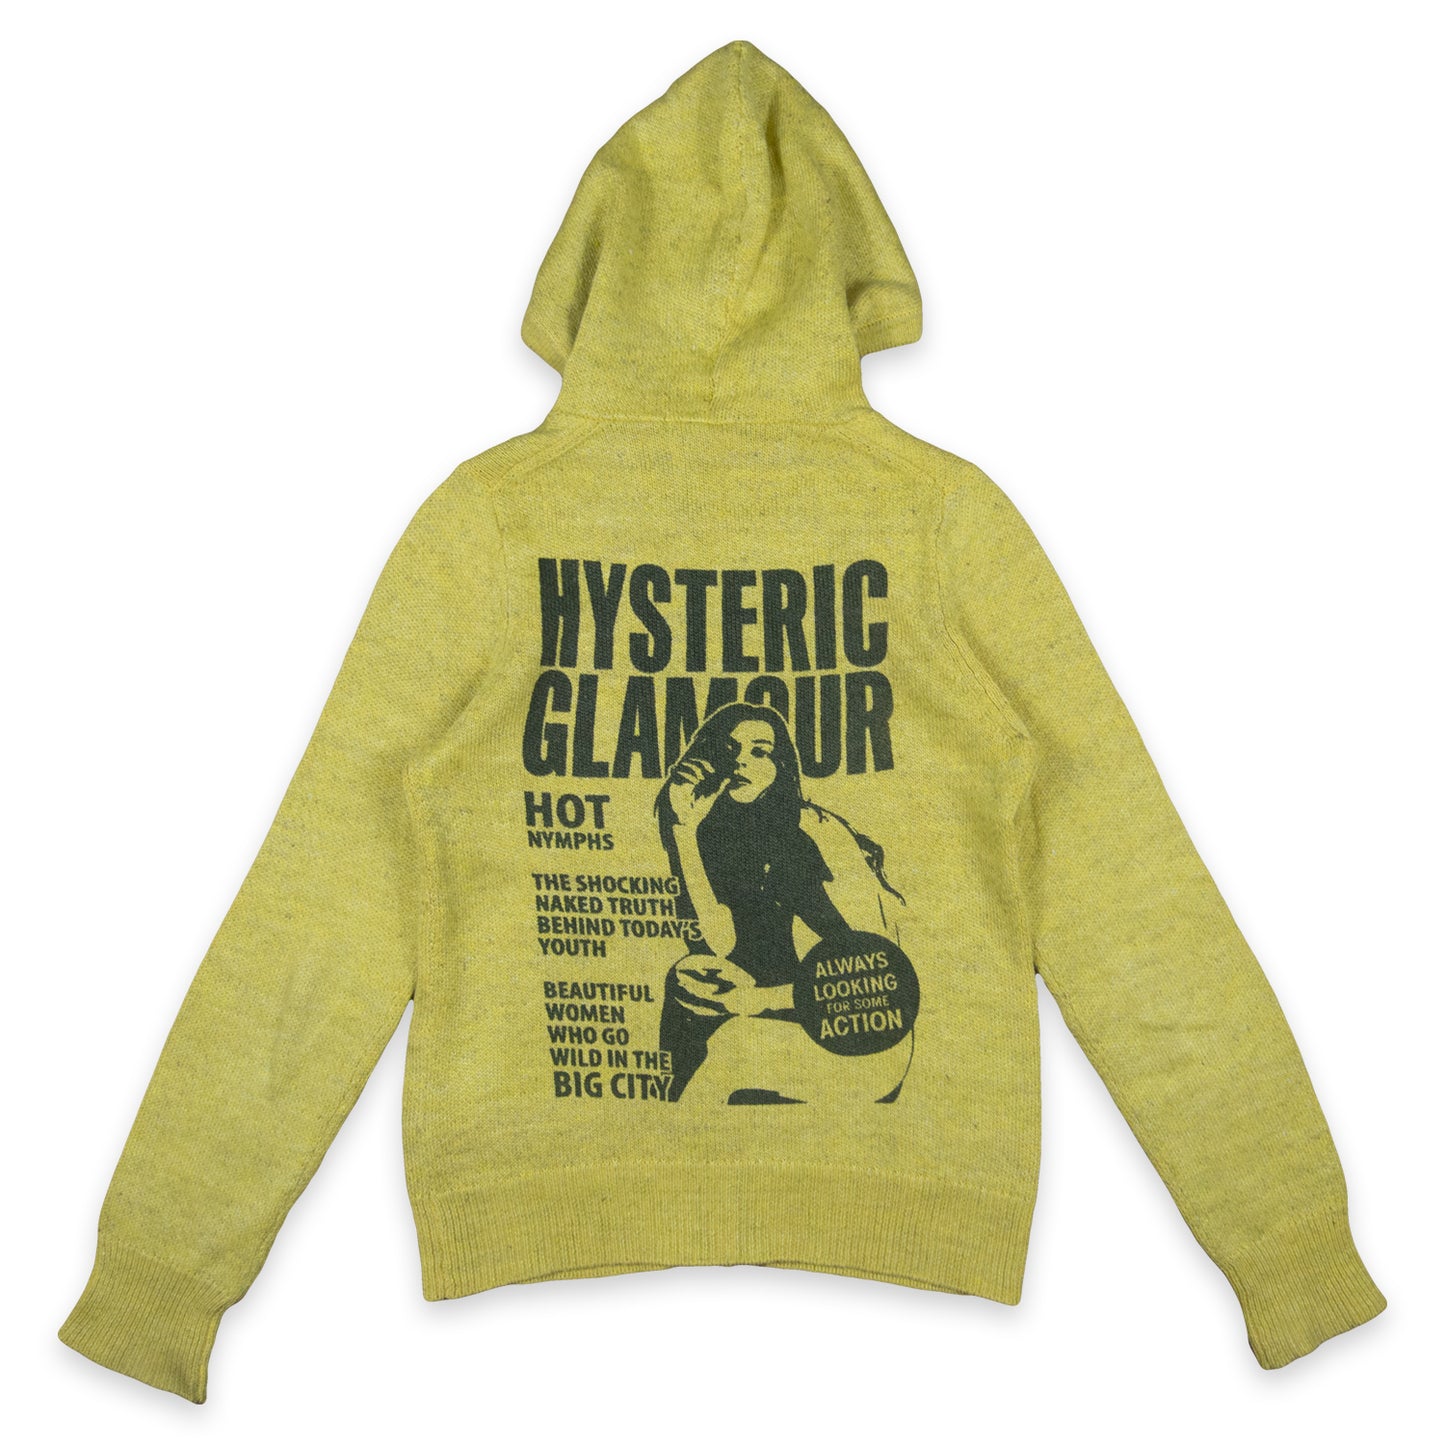 Hysteric Glamour Looking For Action Knit Zip Up Hoodie